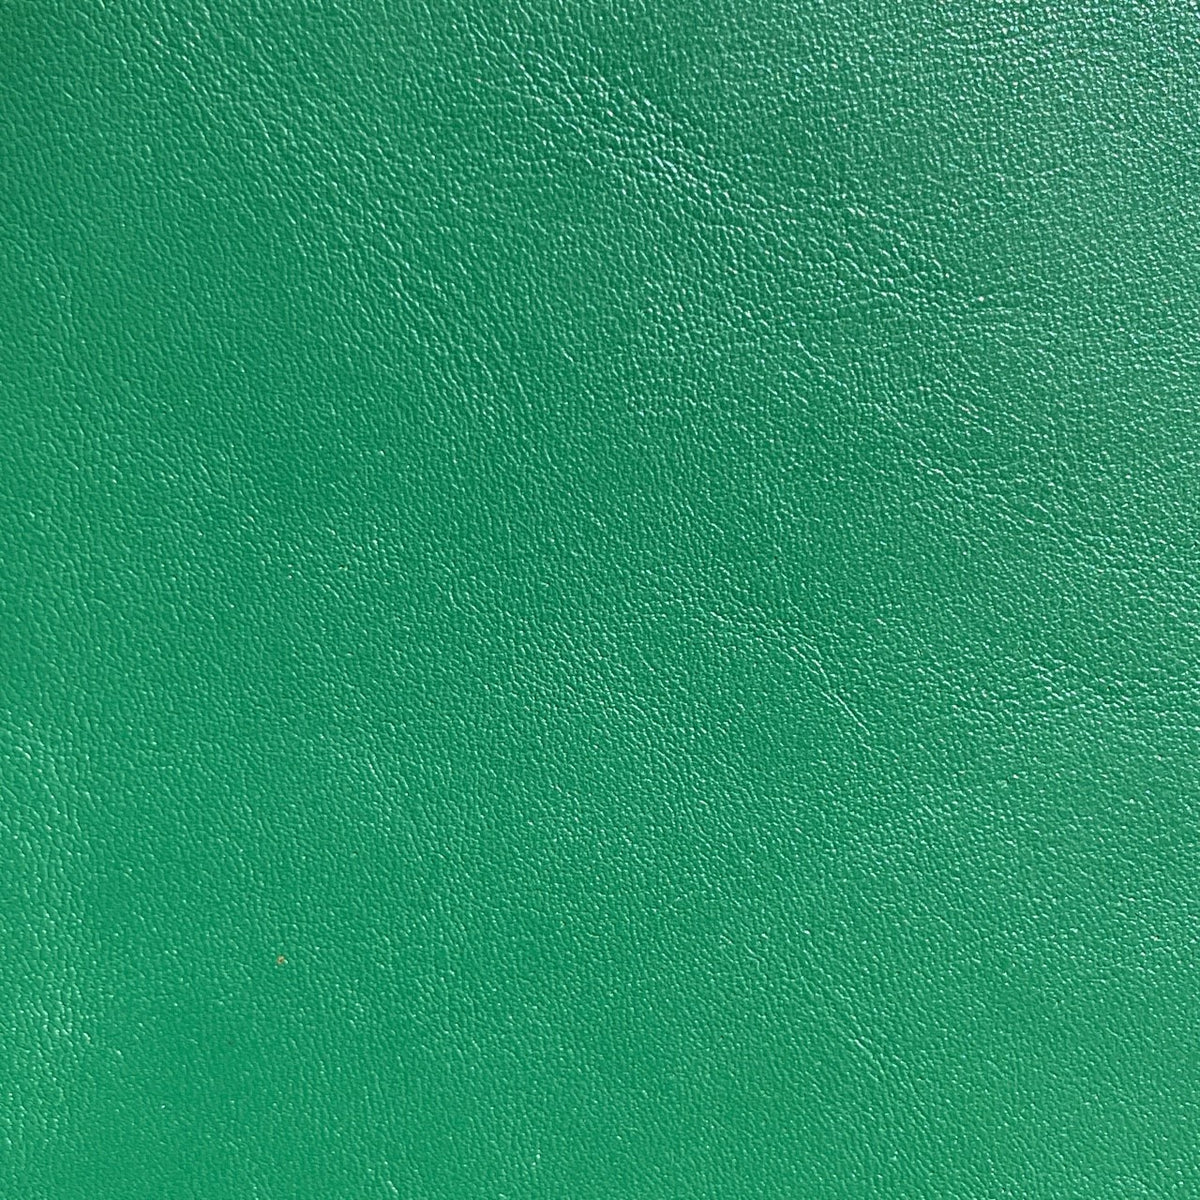 NEW Pigmented Cow | Green | 1.4mm | 15-18 sq.ft | $174 ea.